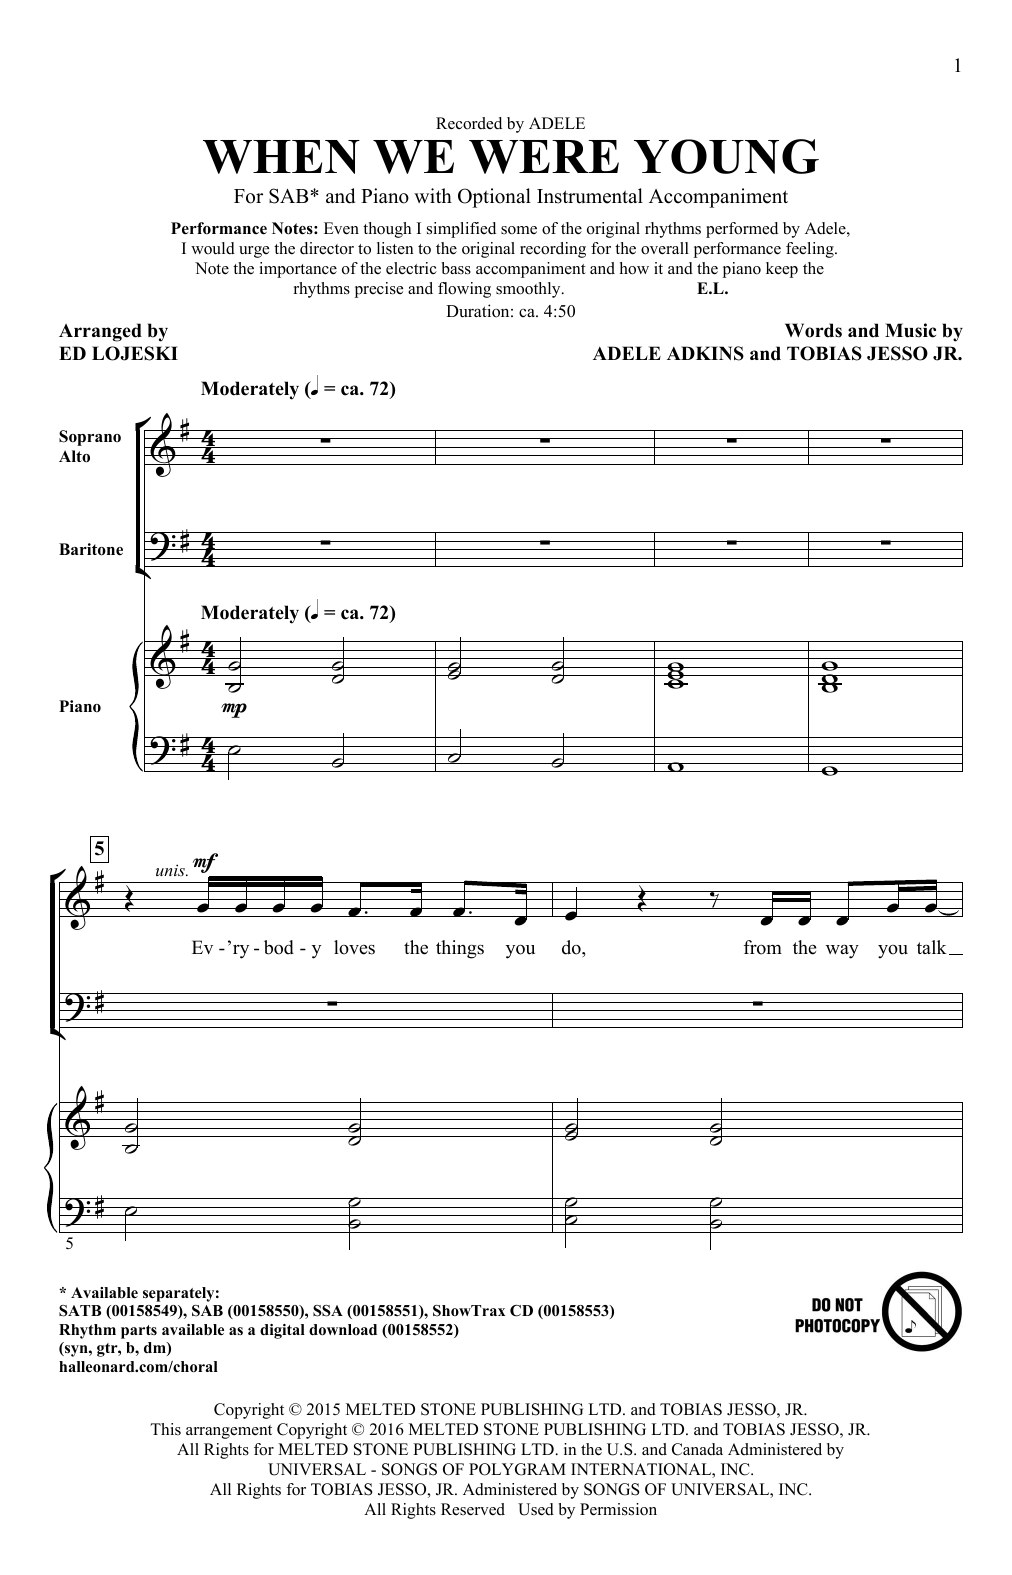 Download Adele When We Were Young (arr. Ed Lojeski) Sheet Music